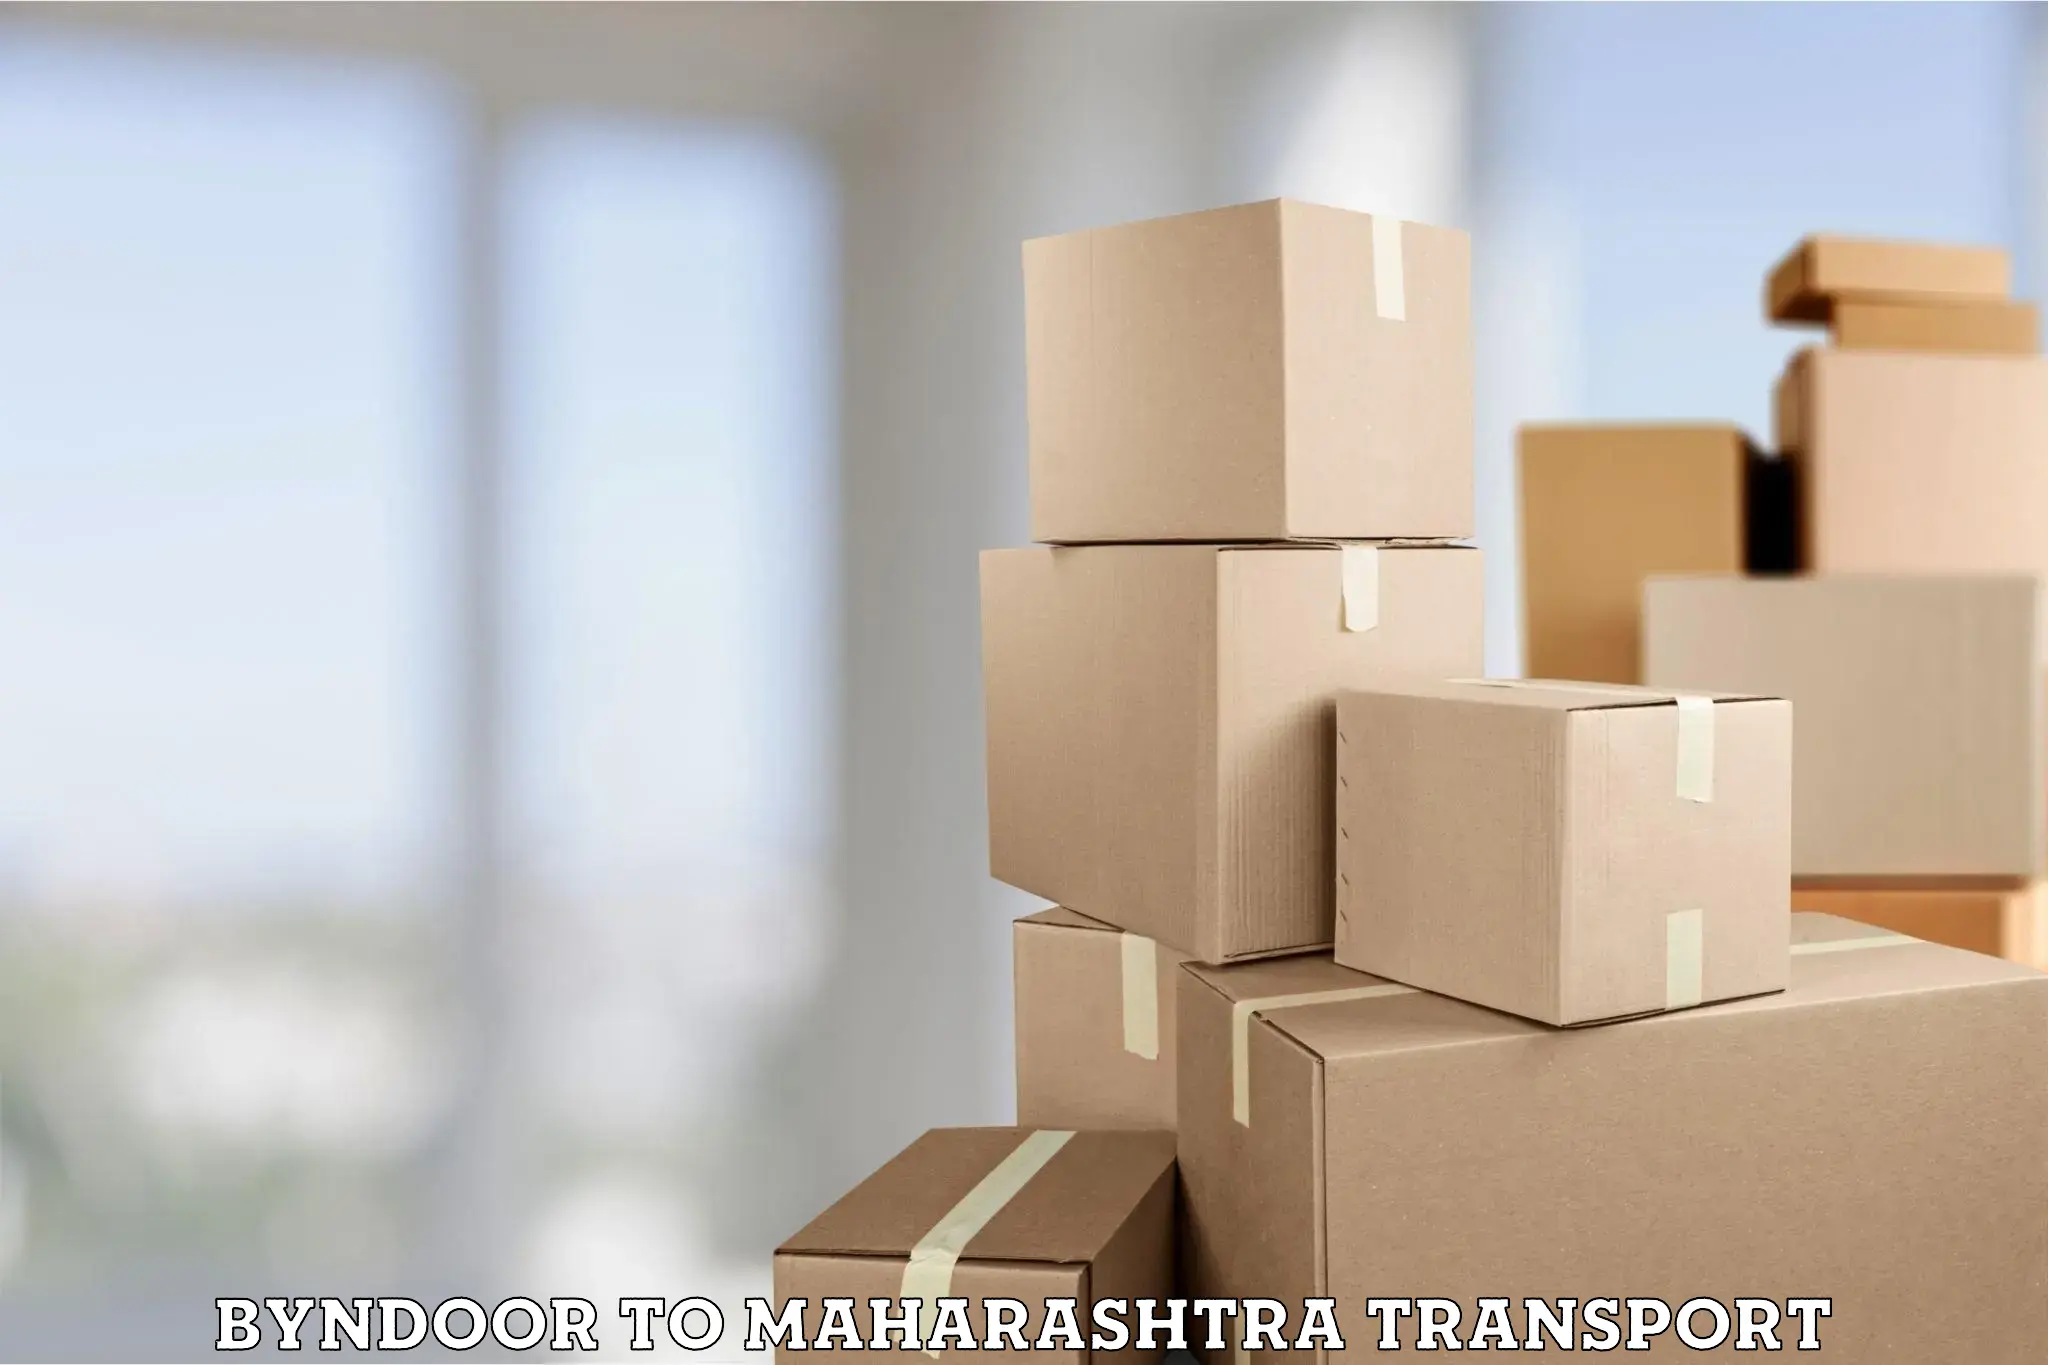 Vehicle transport services in Byndoor to Koregaon